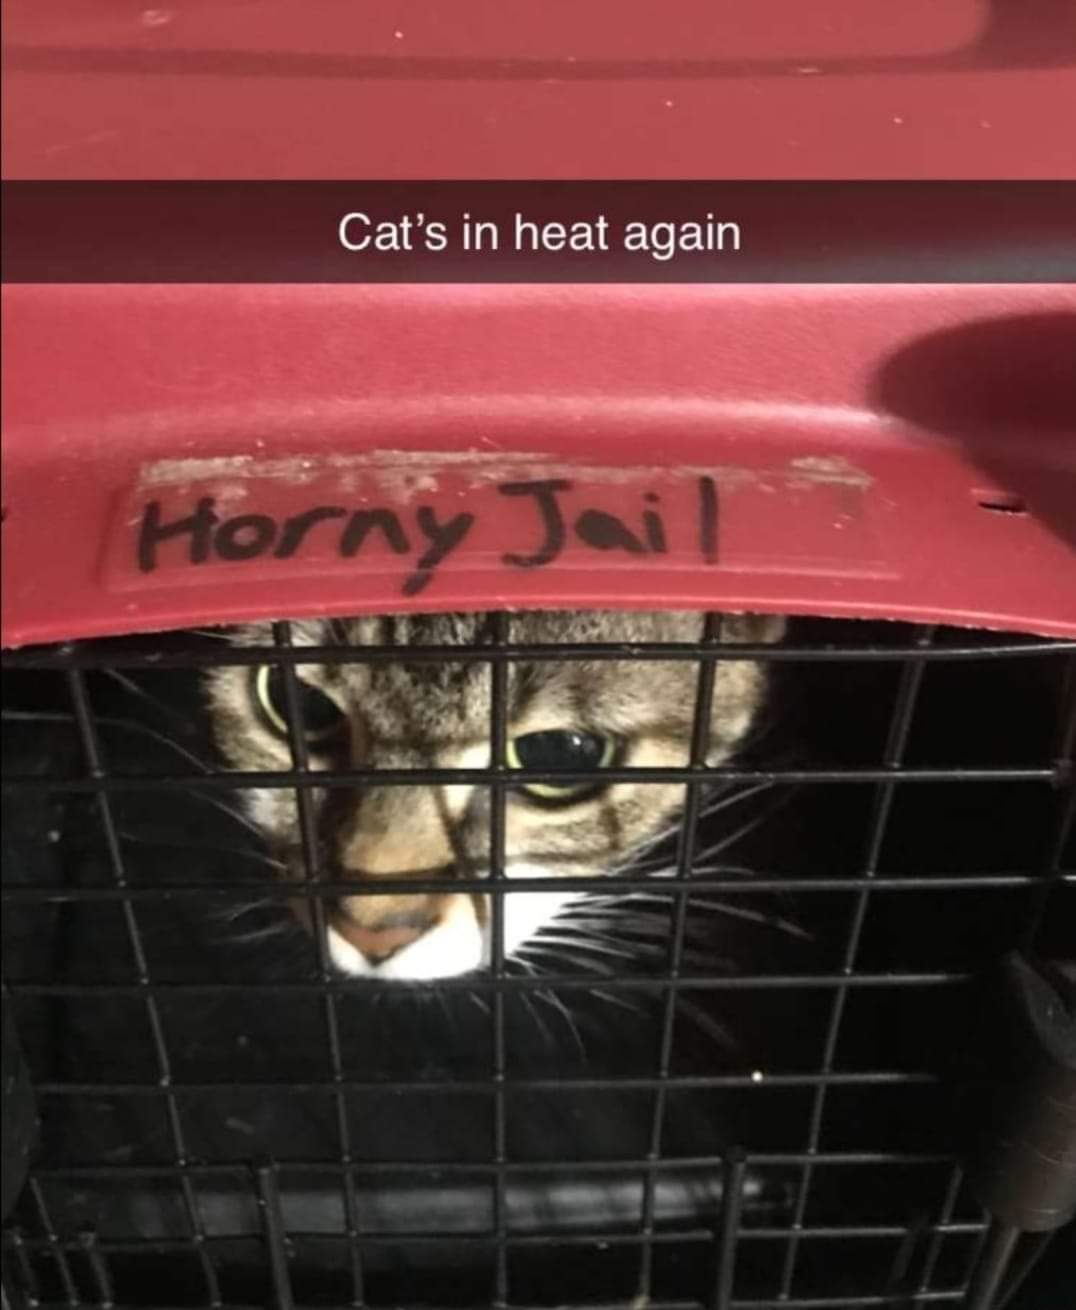 snout - Cat's in heat again Horny Jail